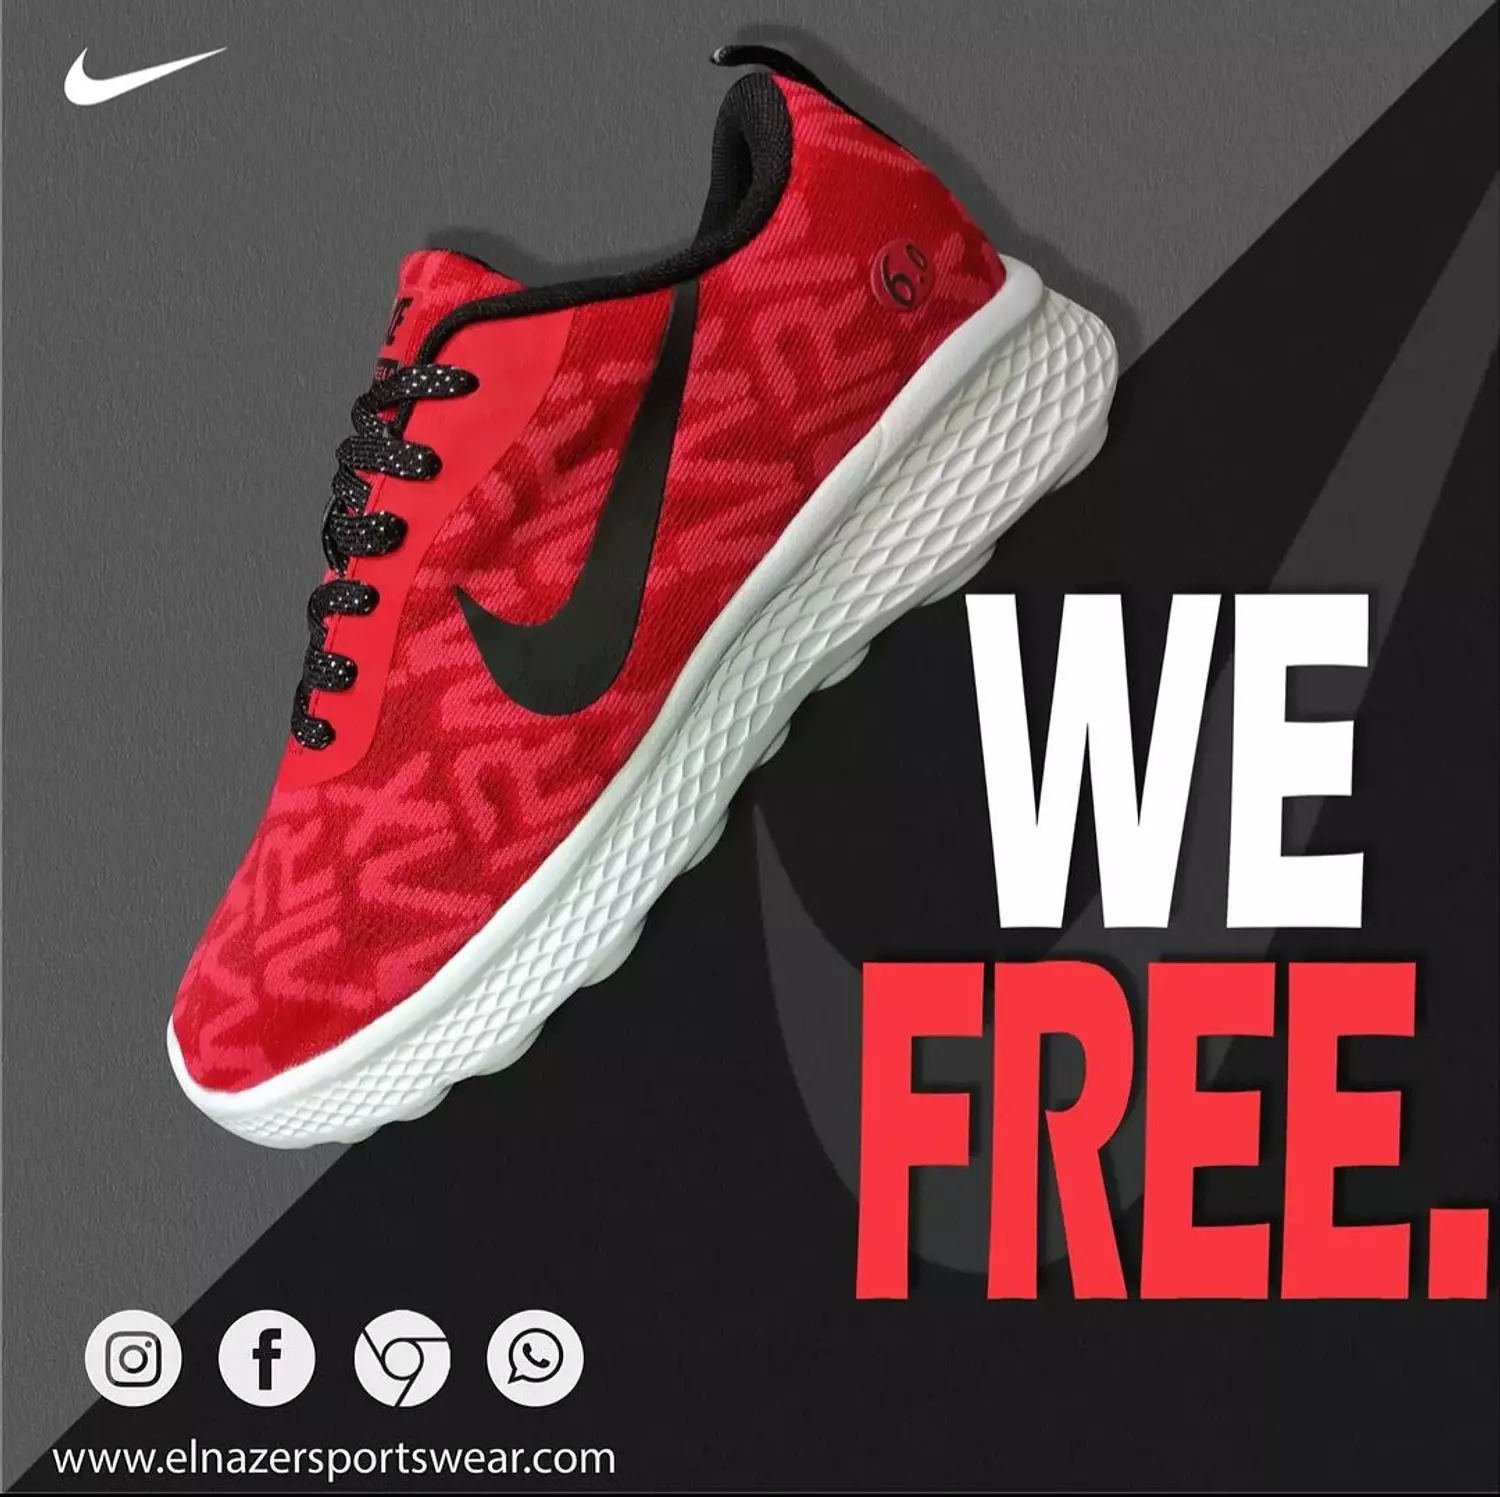 NIKE FREE - RUNNING SHOES hover image